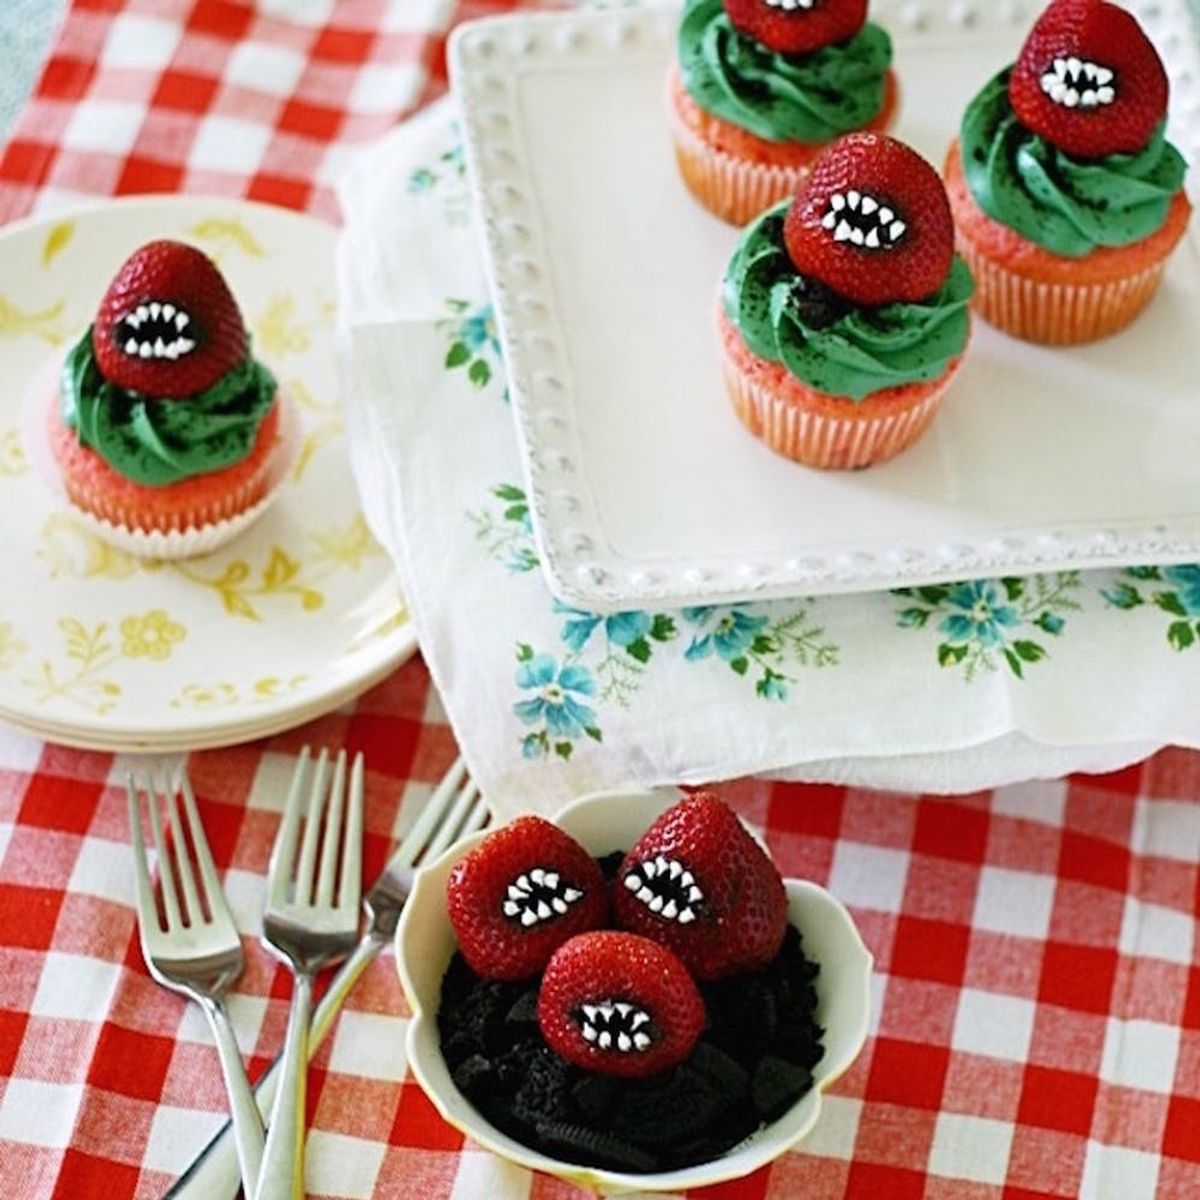 These Halloween Cupcake Ideas such as a venus fly trap and monster strawberries will get you in the spirit.